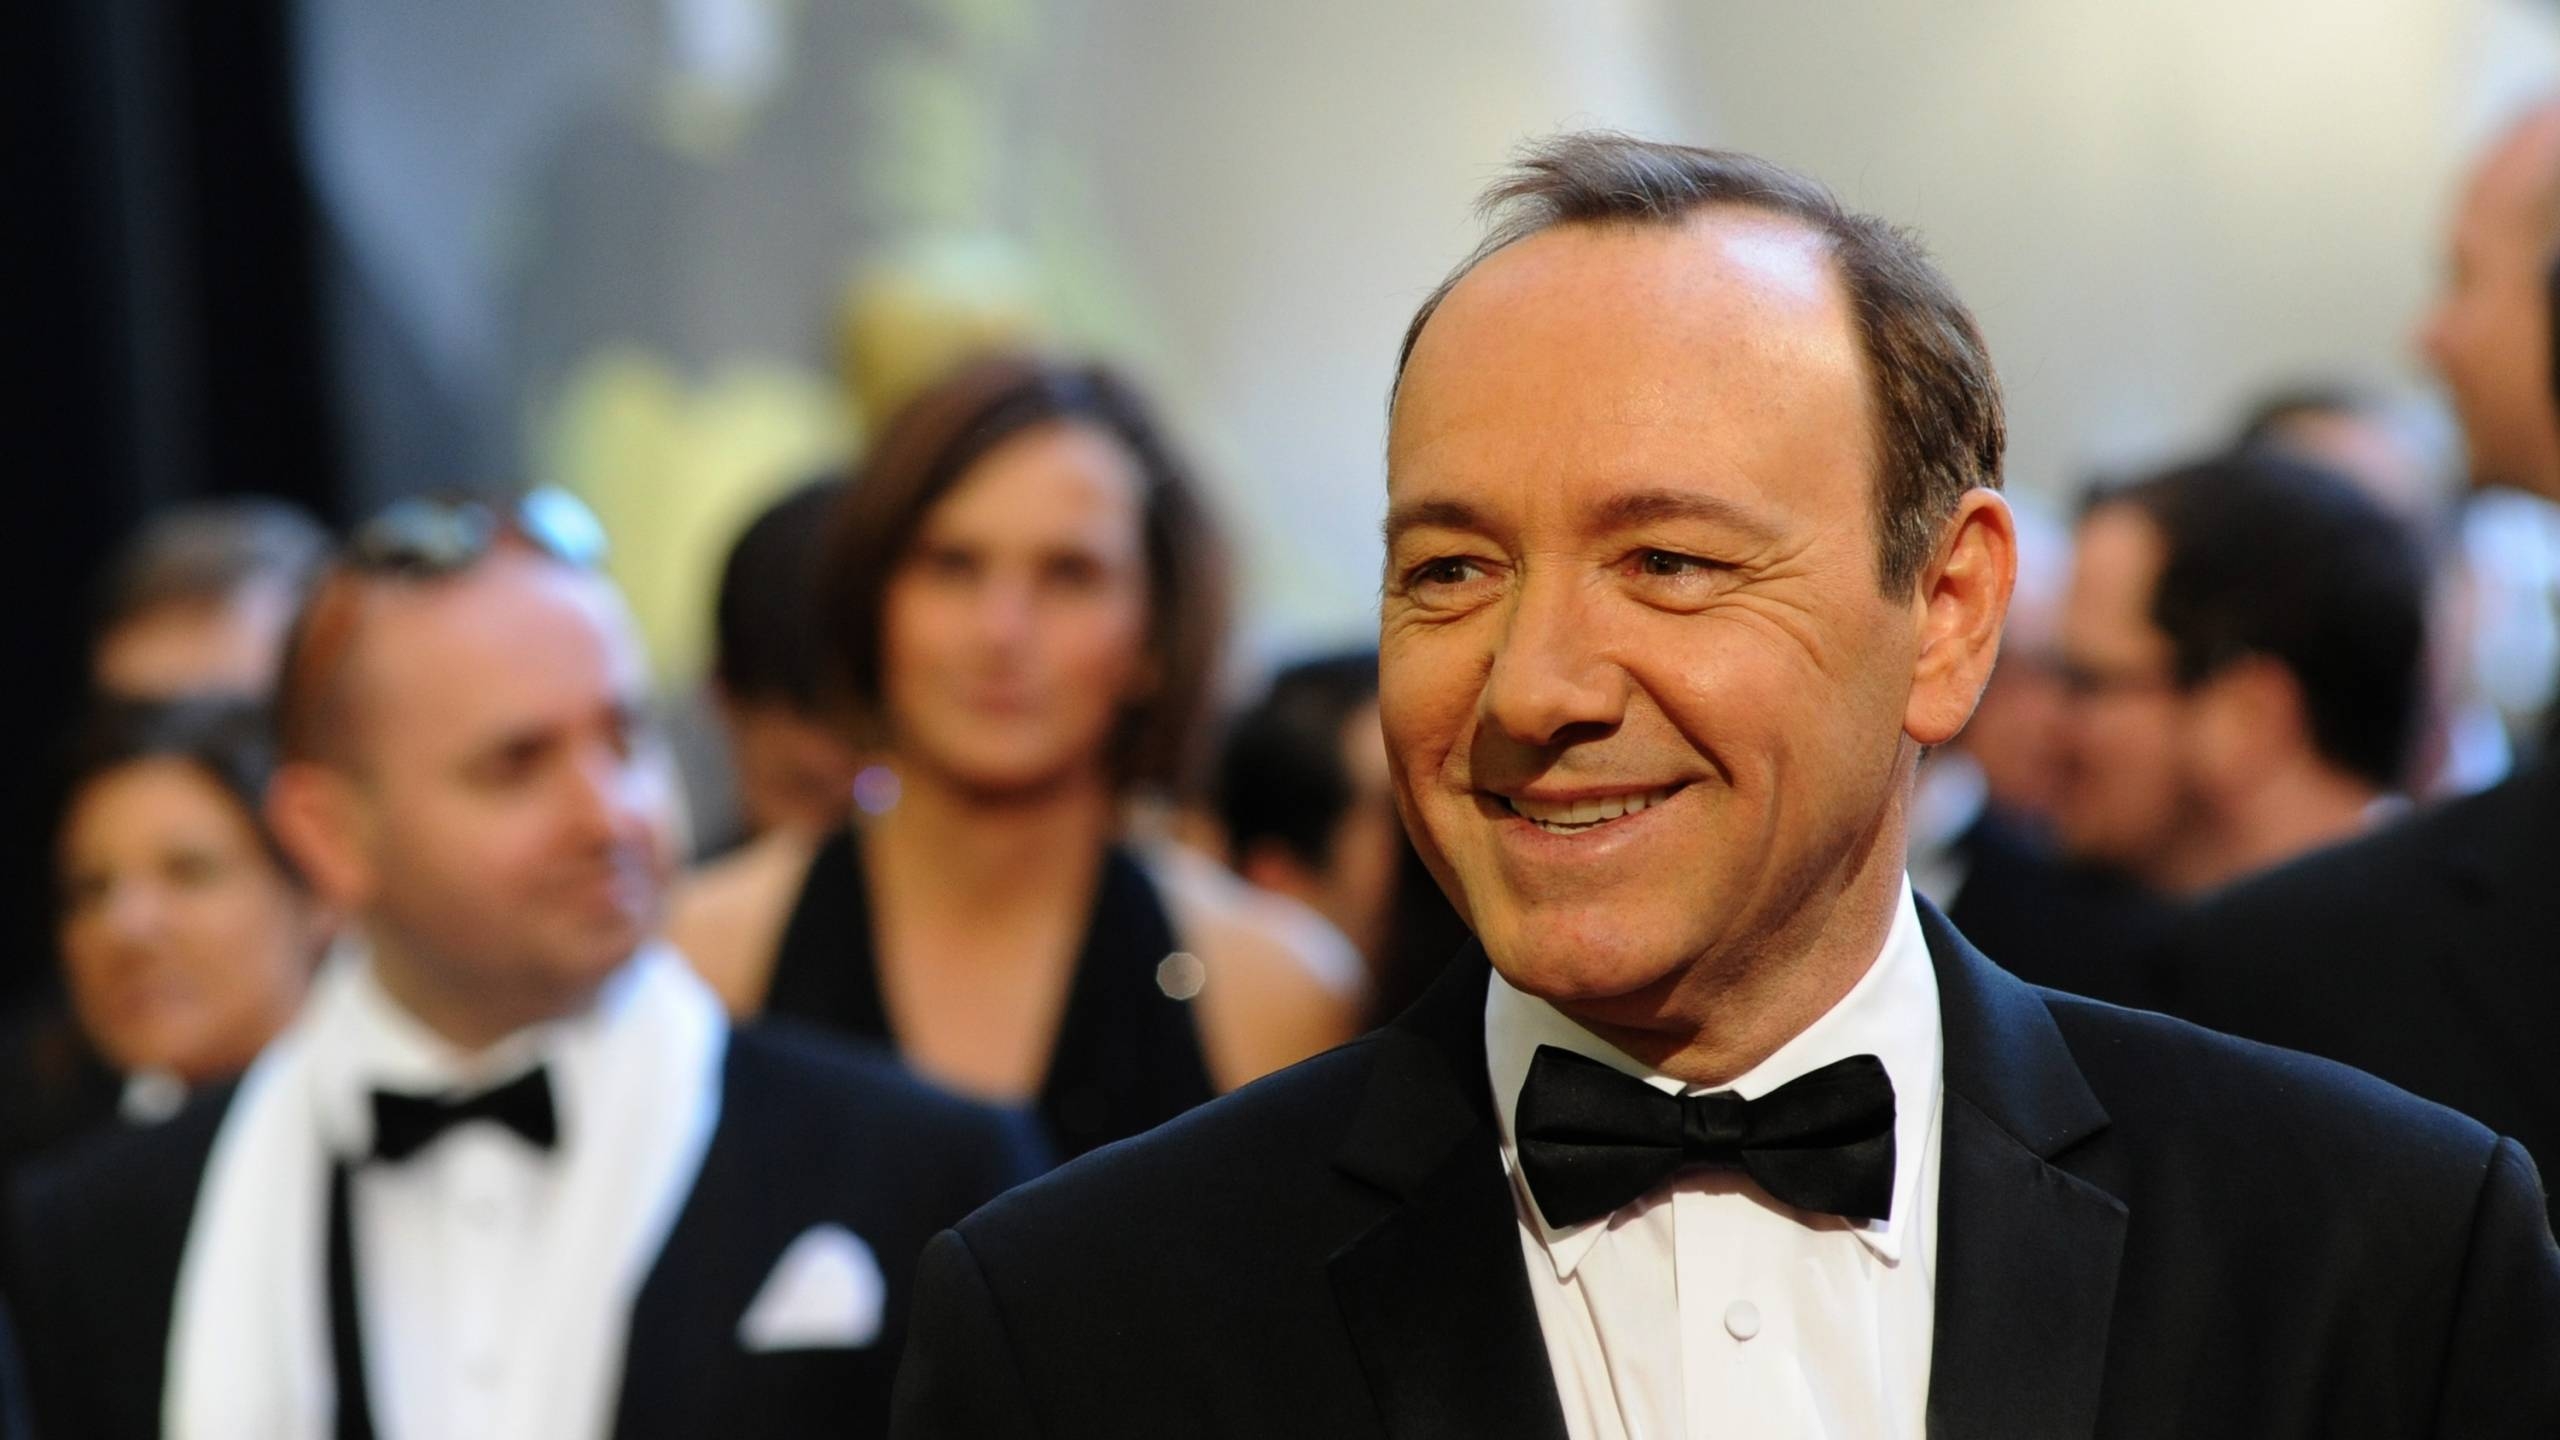 Kevin Spacey Smile for 2560x1440 HDTV resolution